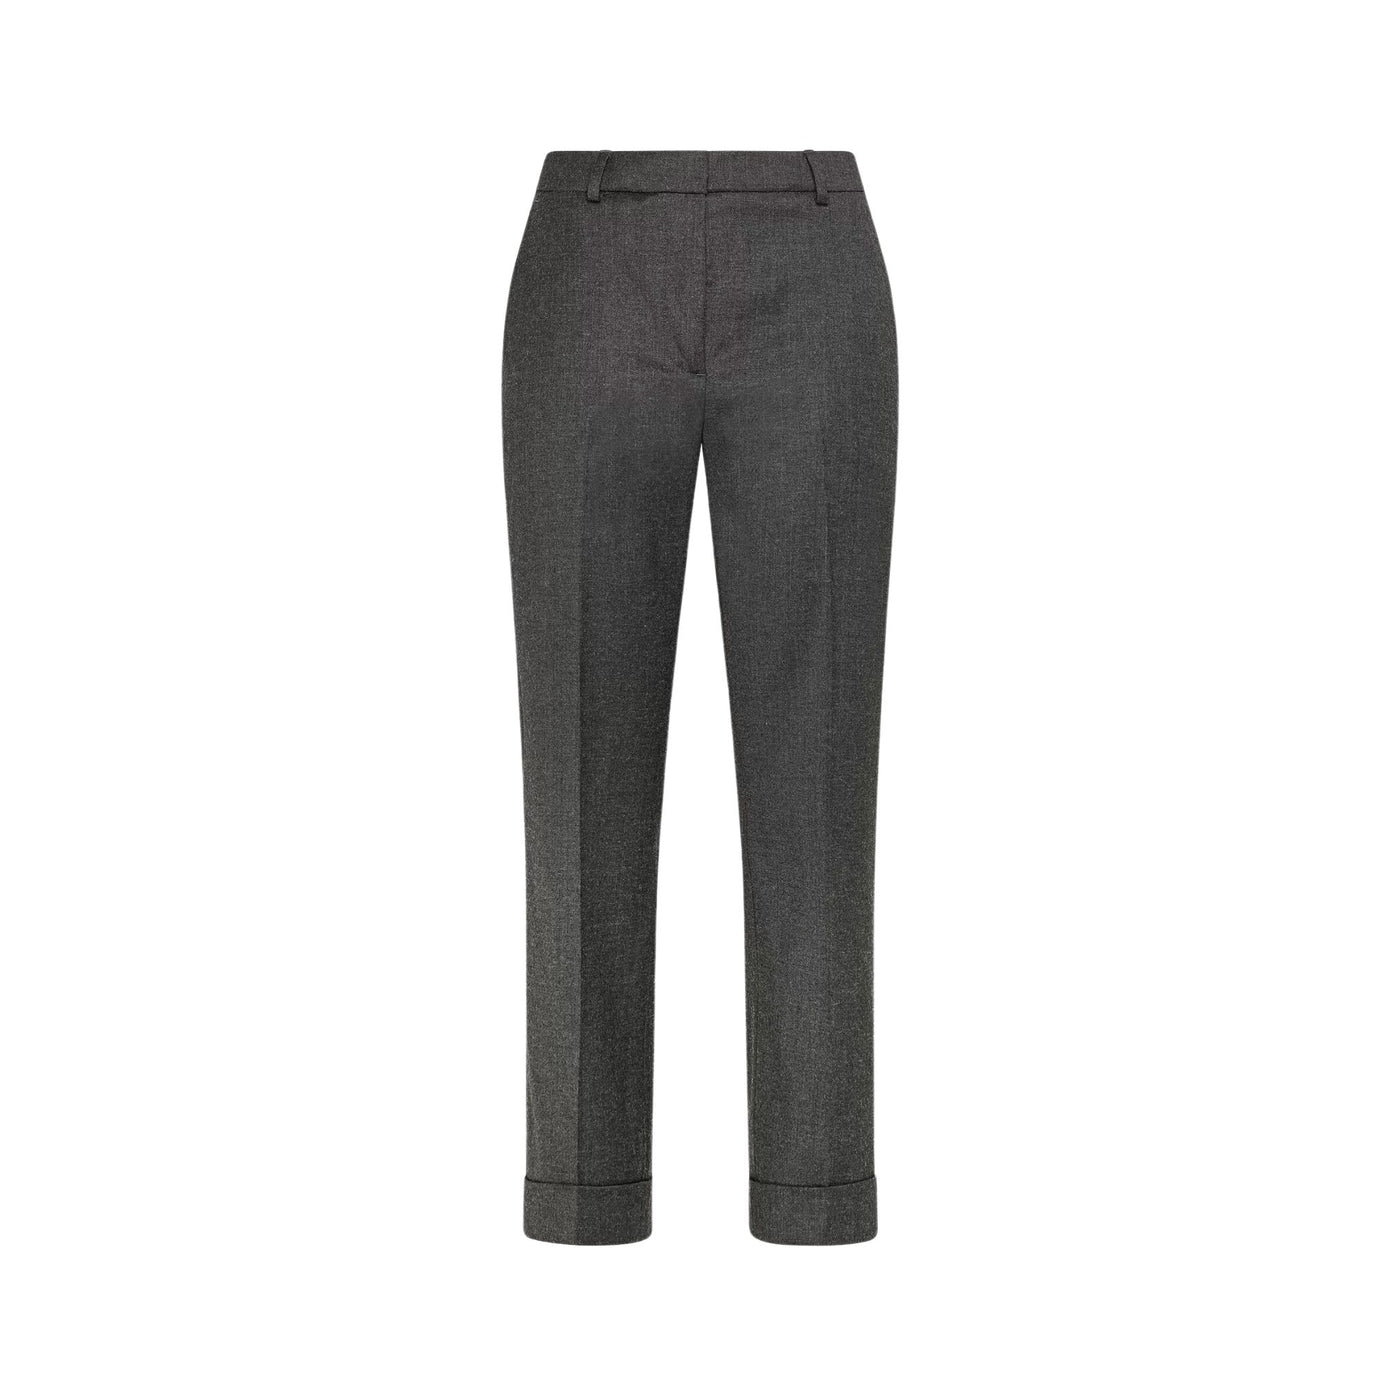 Women's trousers with flounces on the bottom